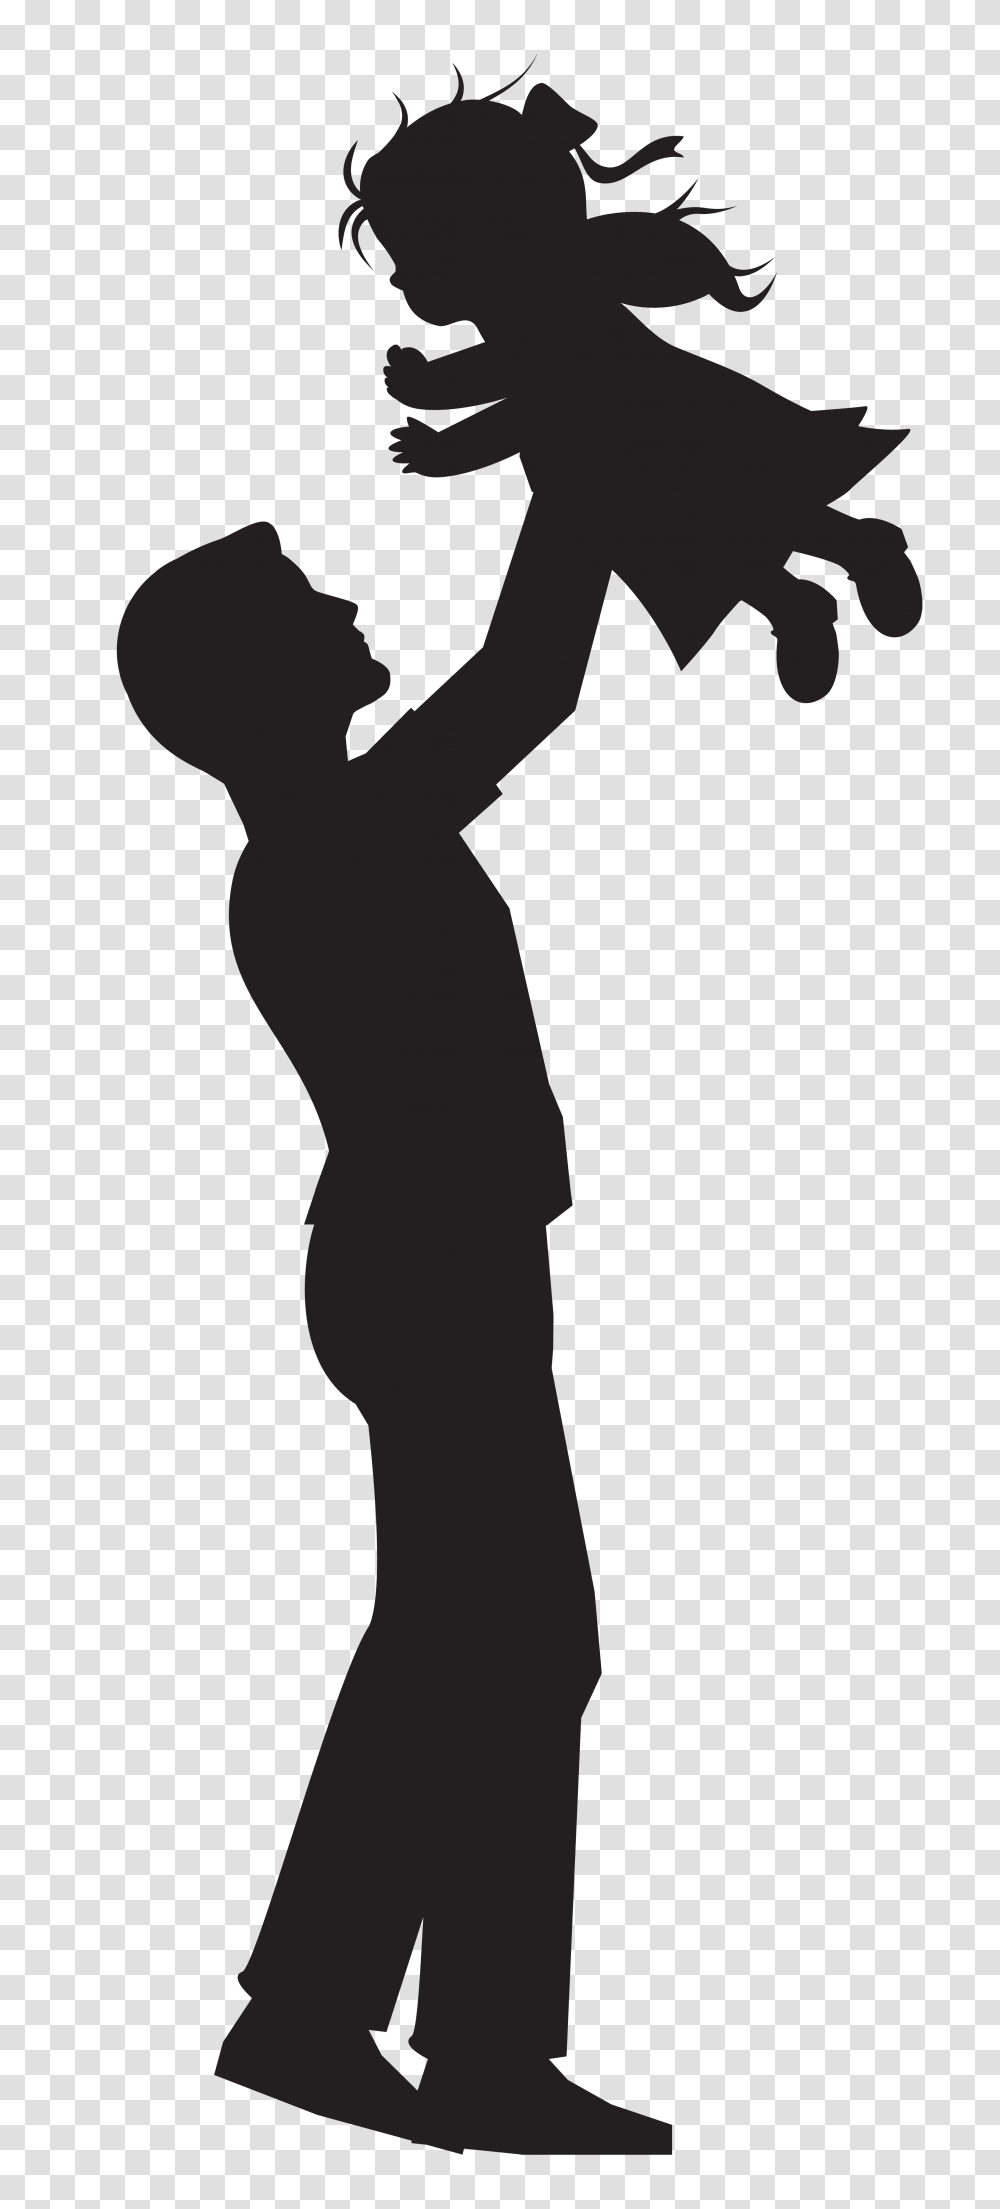 Kiss Silhouette Silhouette Of Man And Woman Kissing, Cross, Symbol, Text, Number Transparent Png